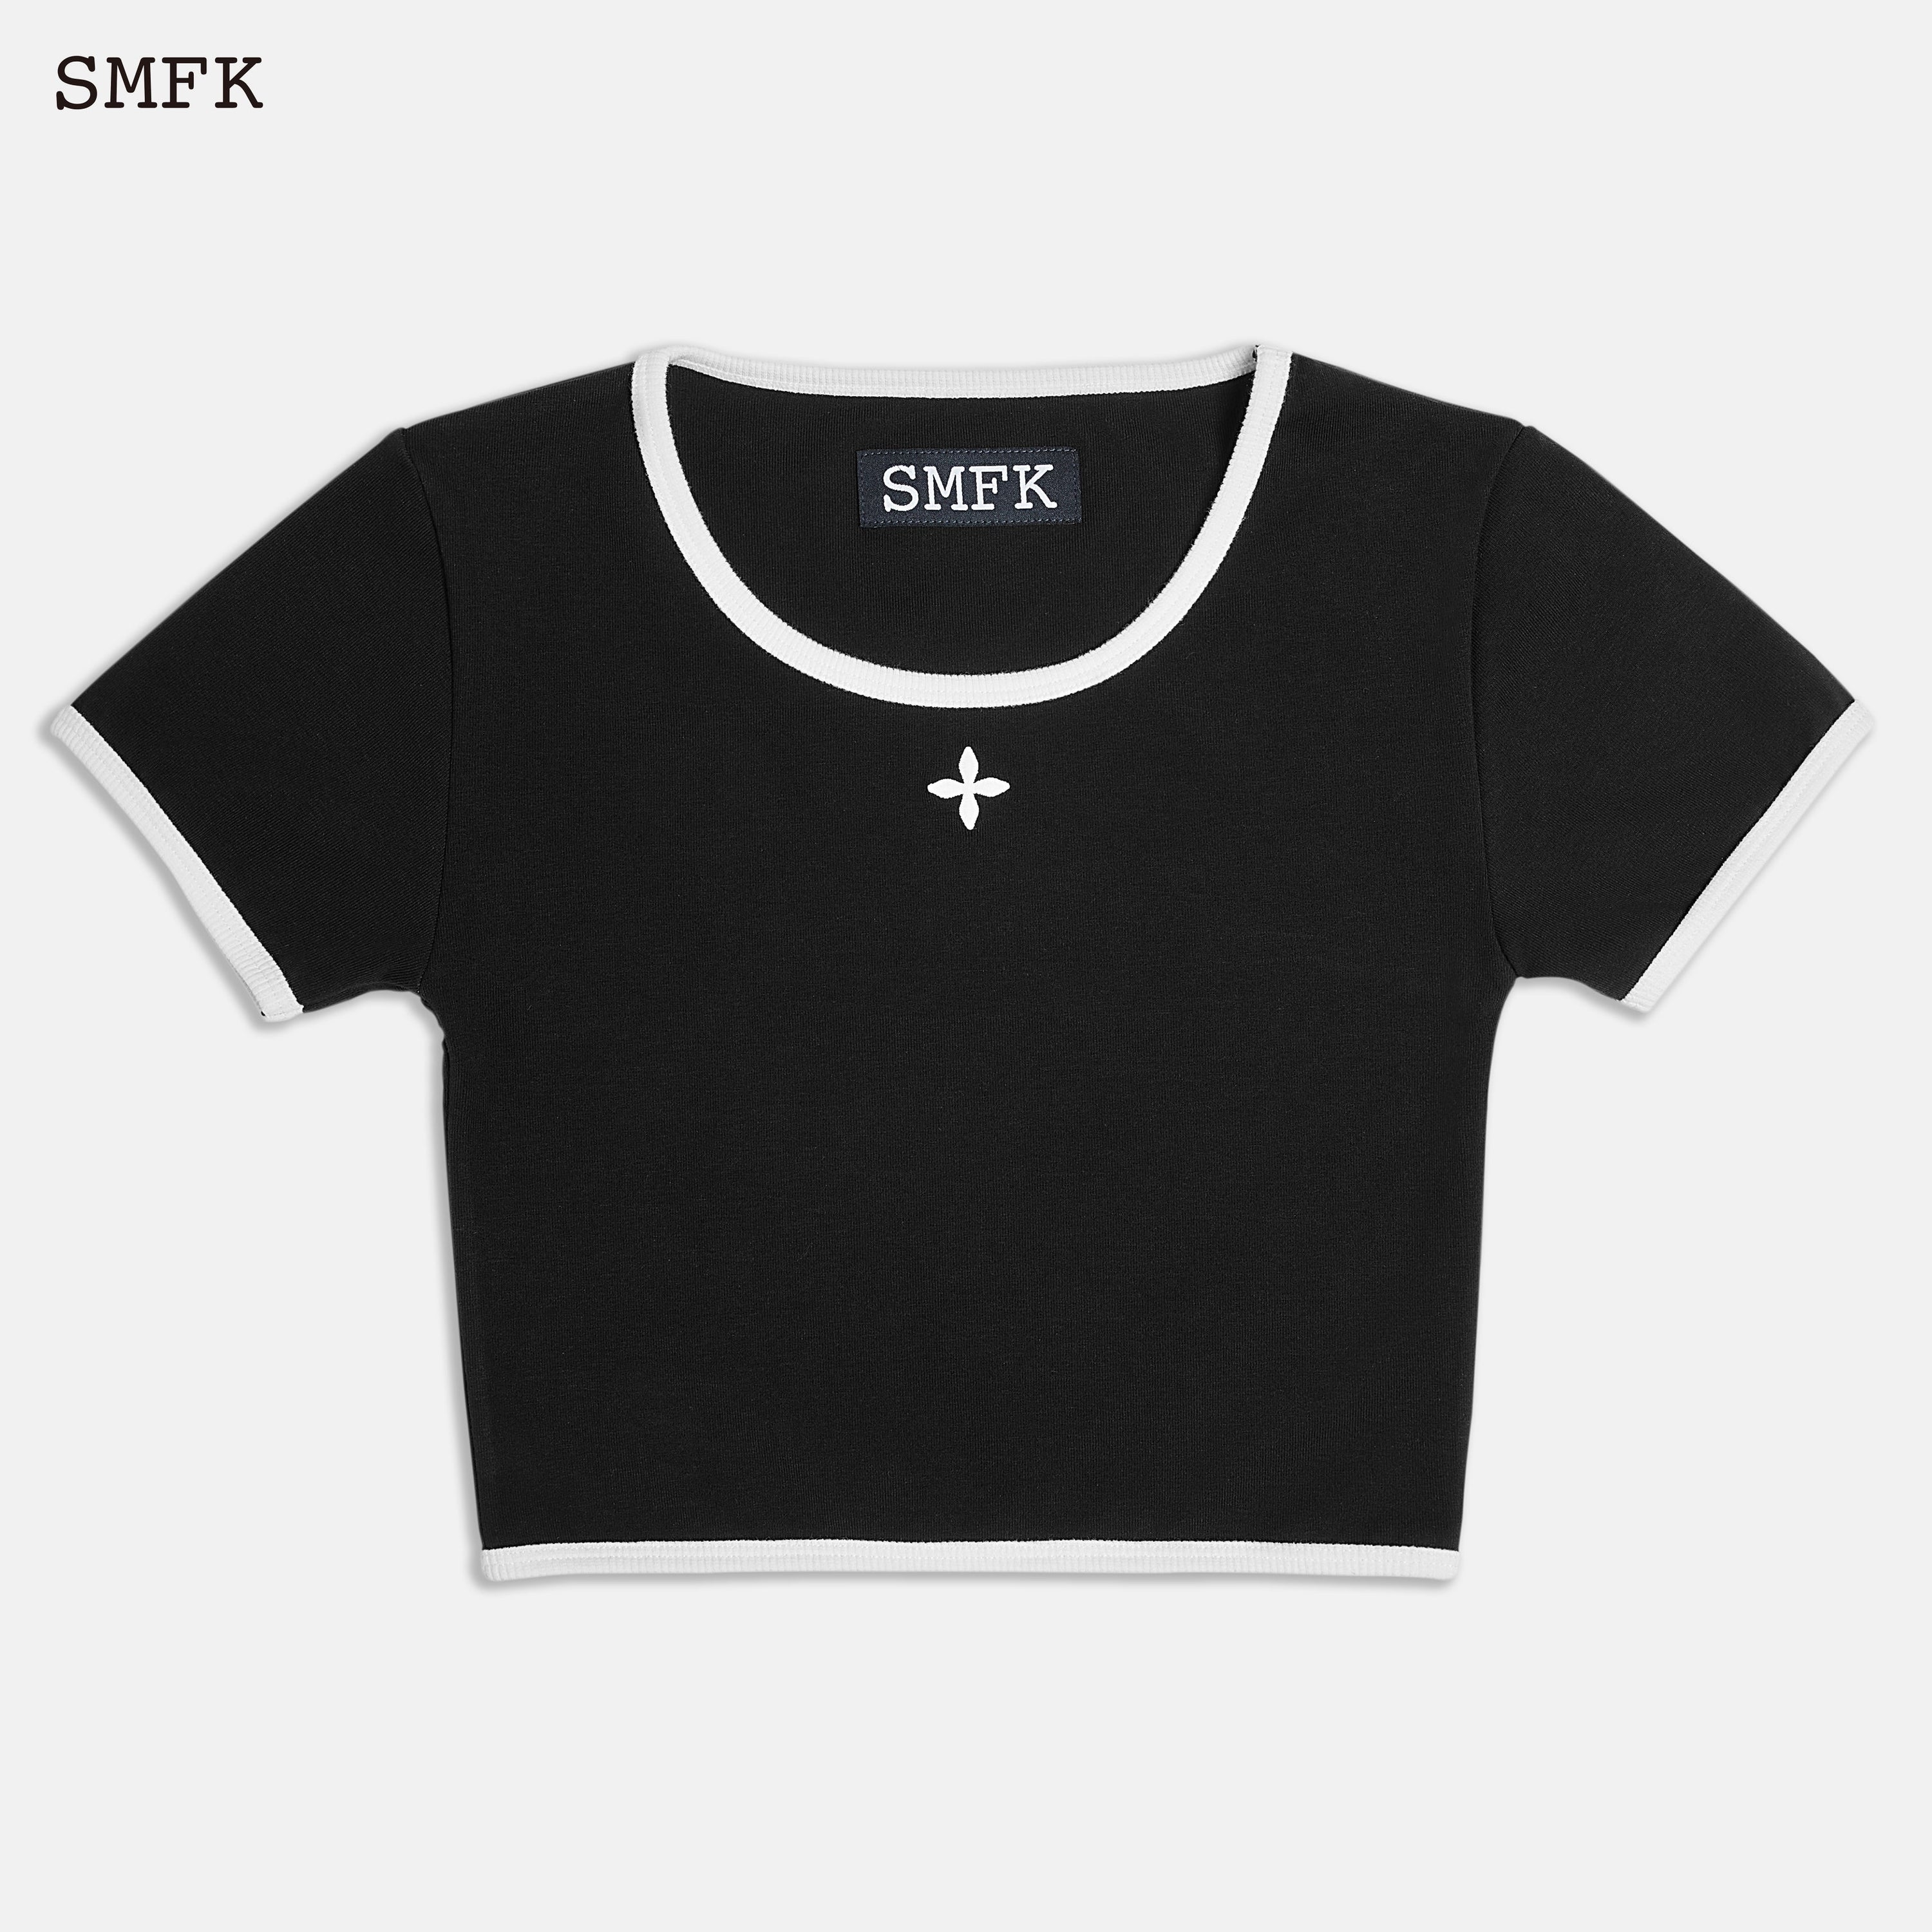 Compass Vintage Sports Short Body Tee Black - SMFK Official